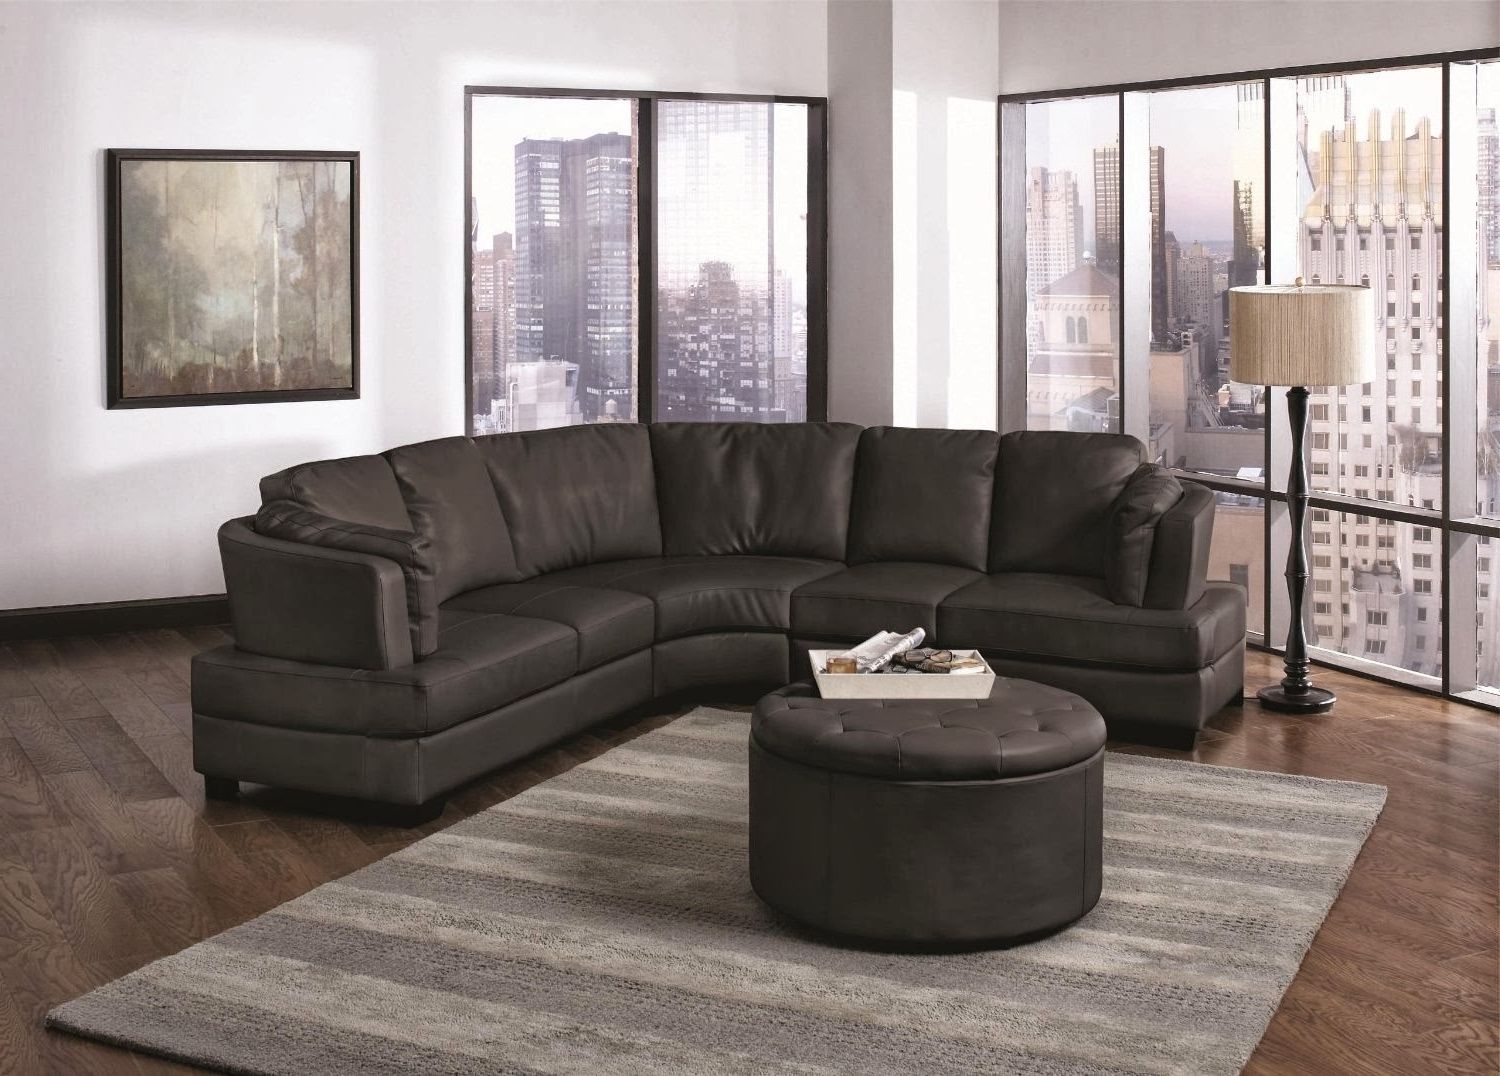 Furniture : Sectional Couch Nanaimo Sectional Sofa Bed With With Well Known Nanaimo Sectional Sofas (View 1 of 20)